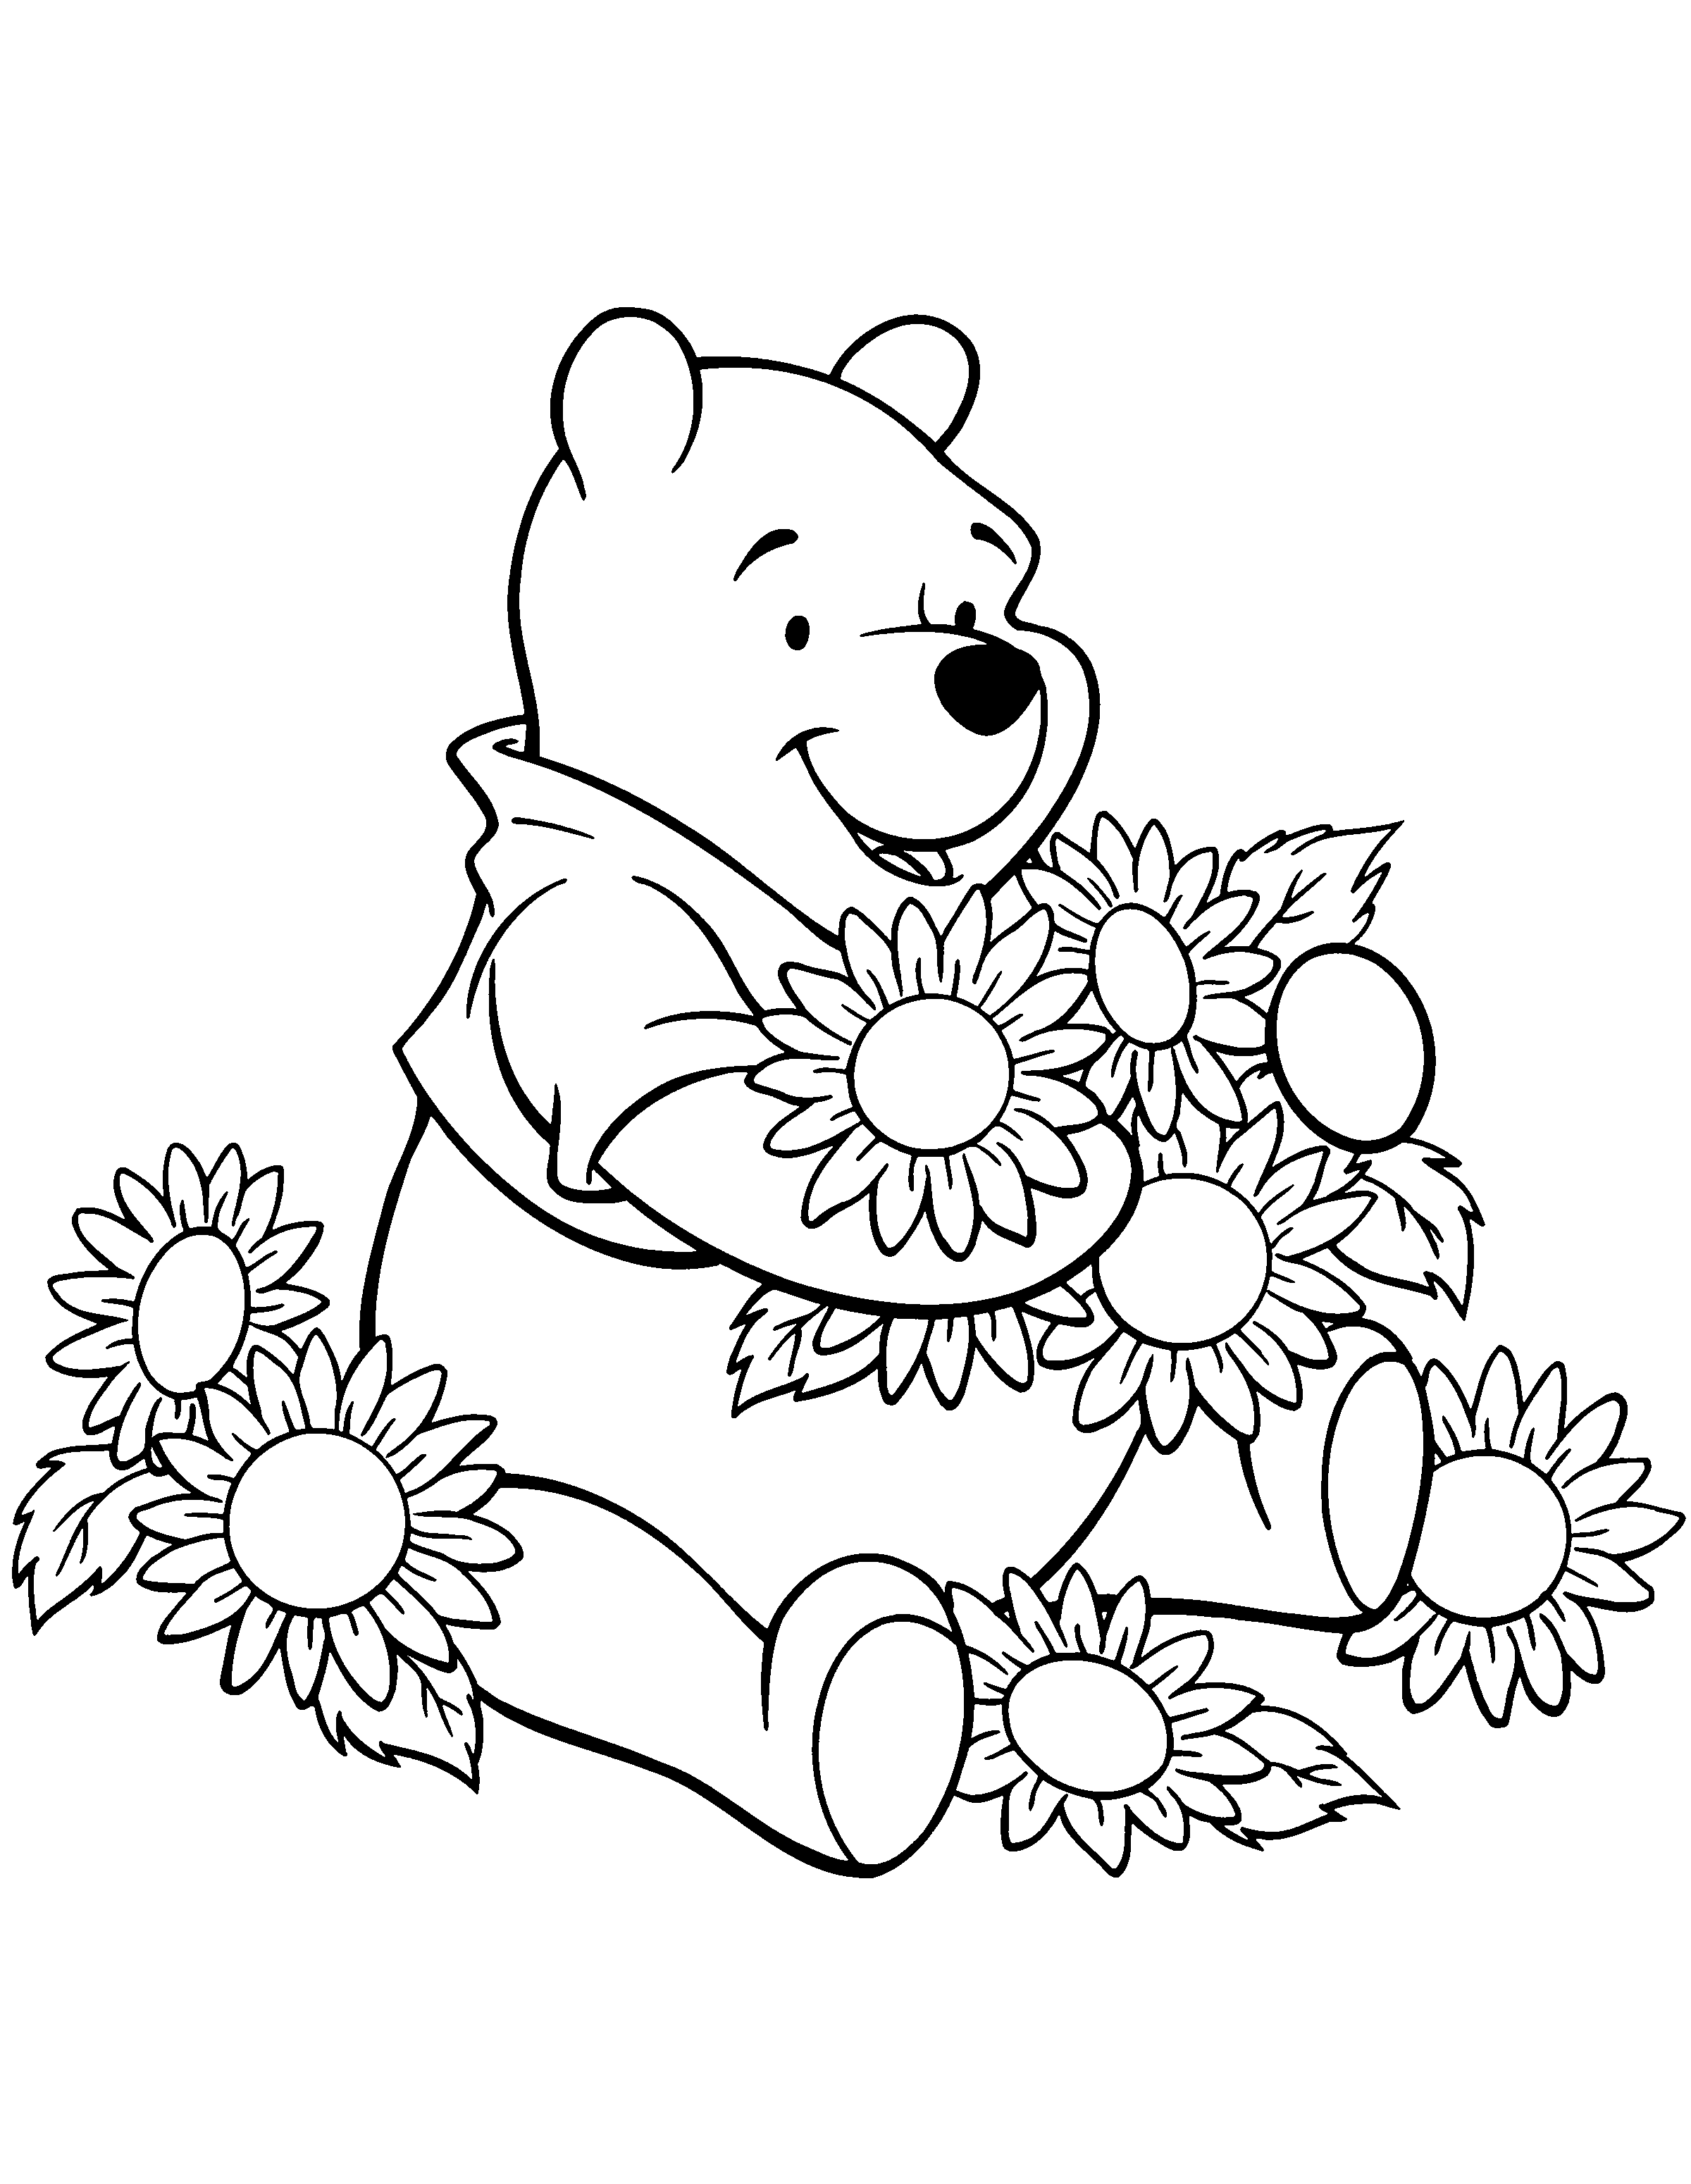 Winnie The Pooh Coloring Pages (3) Coloring Kids